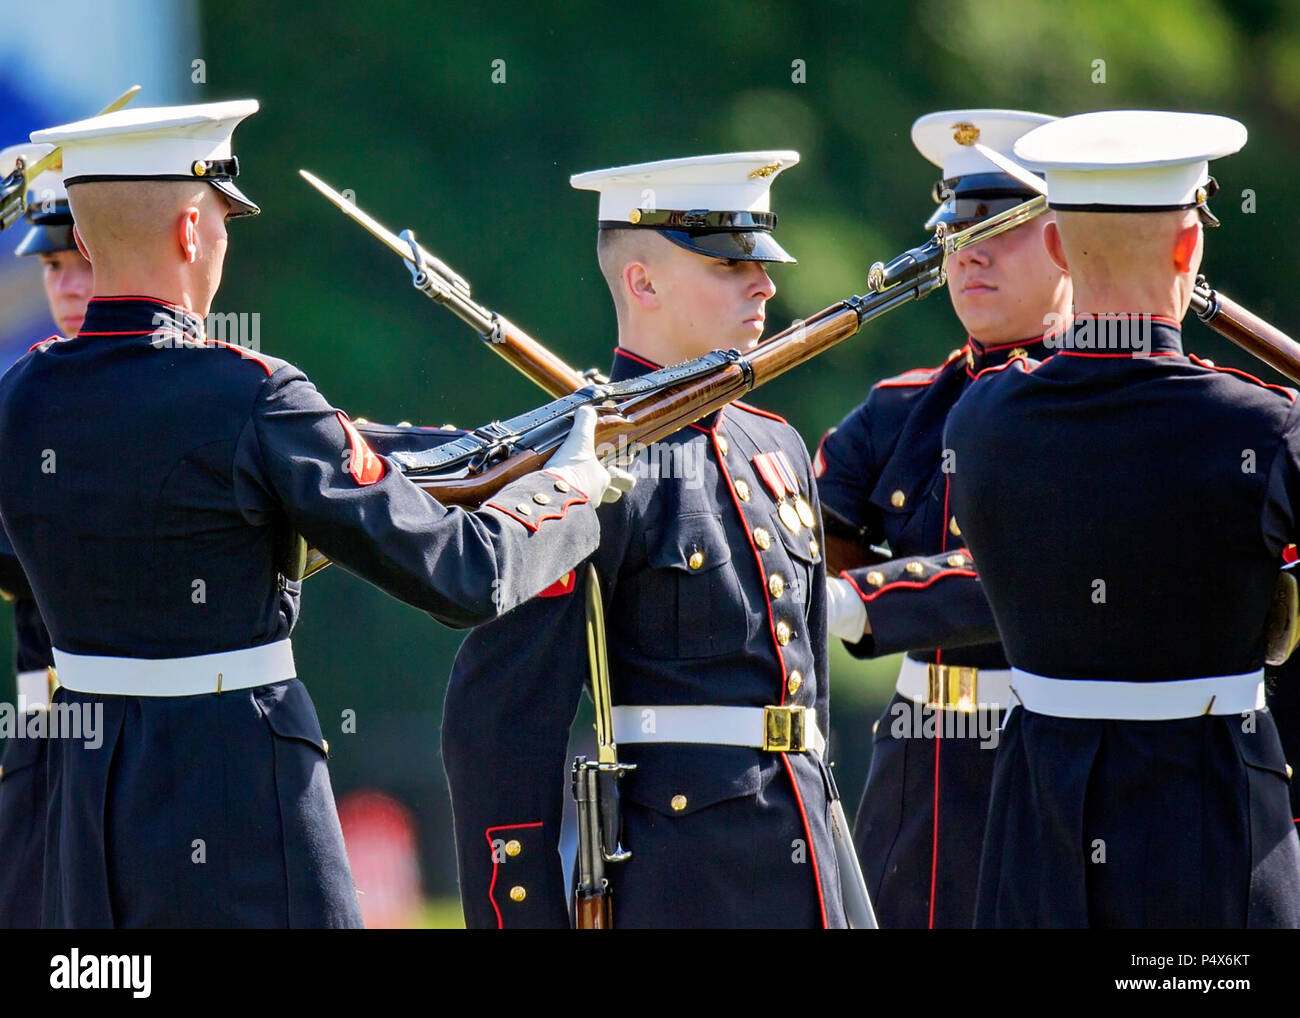 The U.S. Marine Corps Silent Drill Platoon performs during the Centennial Celebration Ceremony at Lejeune Field, Marine Corps Base (MCB) Quantico, Va., May 10, 2017. The event commemorates the founding of MCB Quantico in 1917, and consisted of performances by the U.S. Marine Corps Silent Drill Platoon and the U.S. Marine Drum & Bugle Corps. Stock Photo